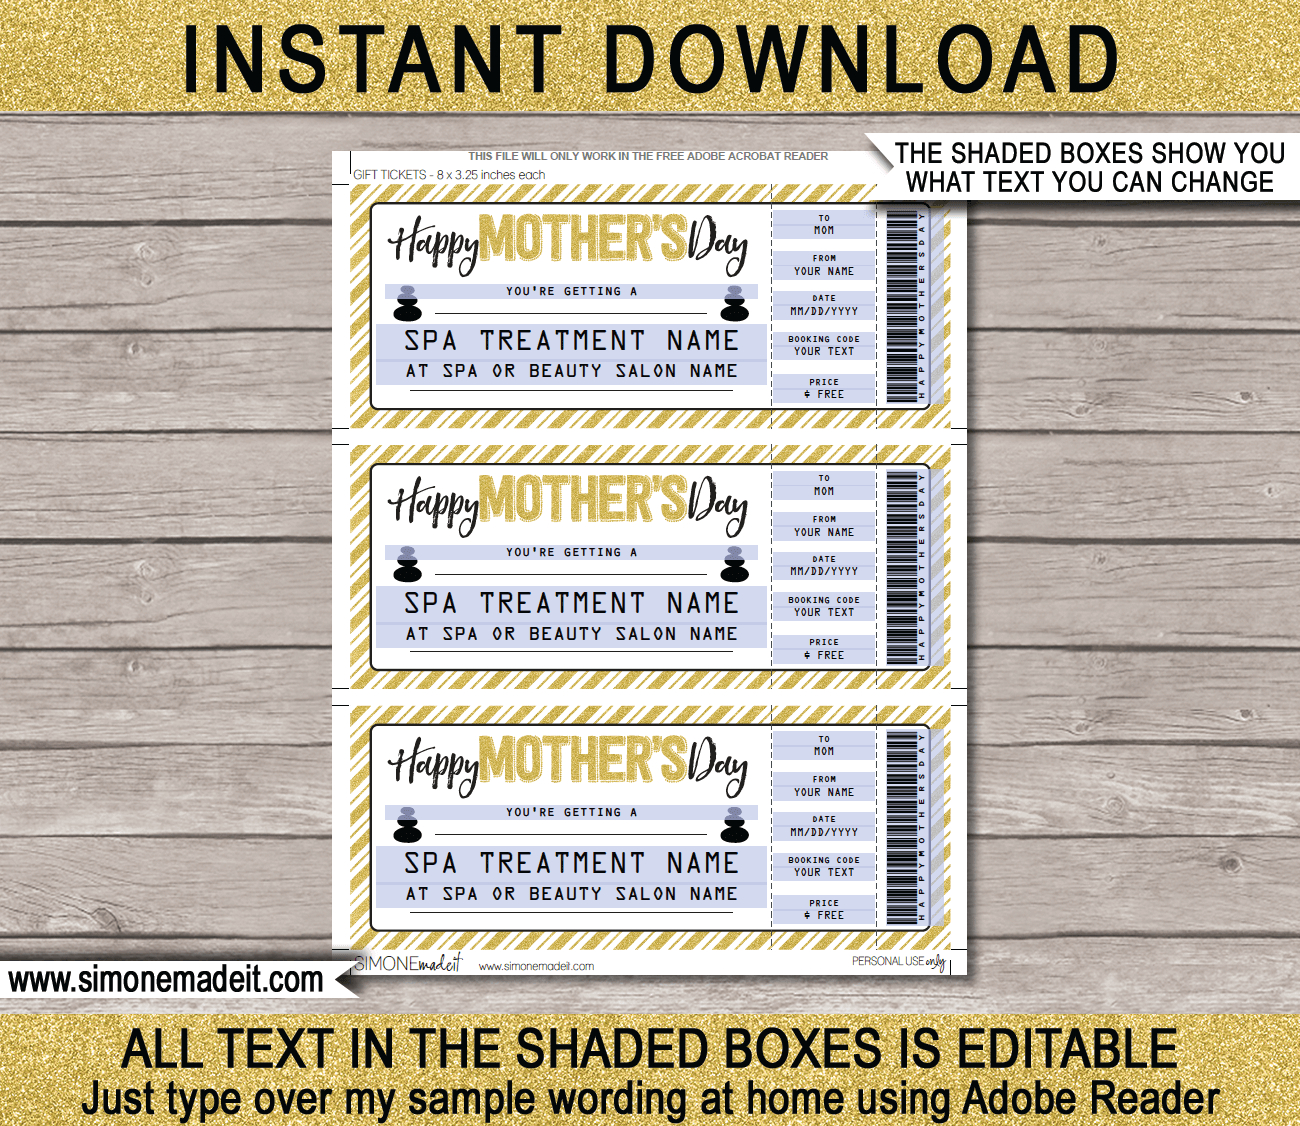 Mother's Day Spa Gift Voucher Intended For Spa Day Gift Certificate Template